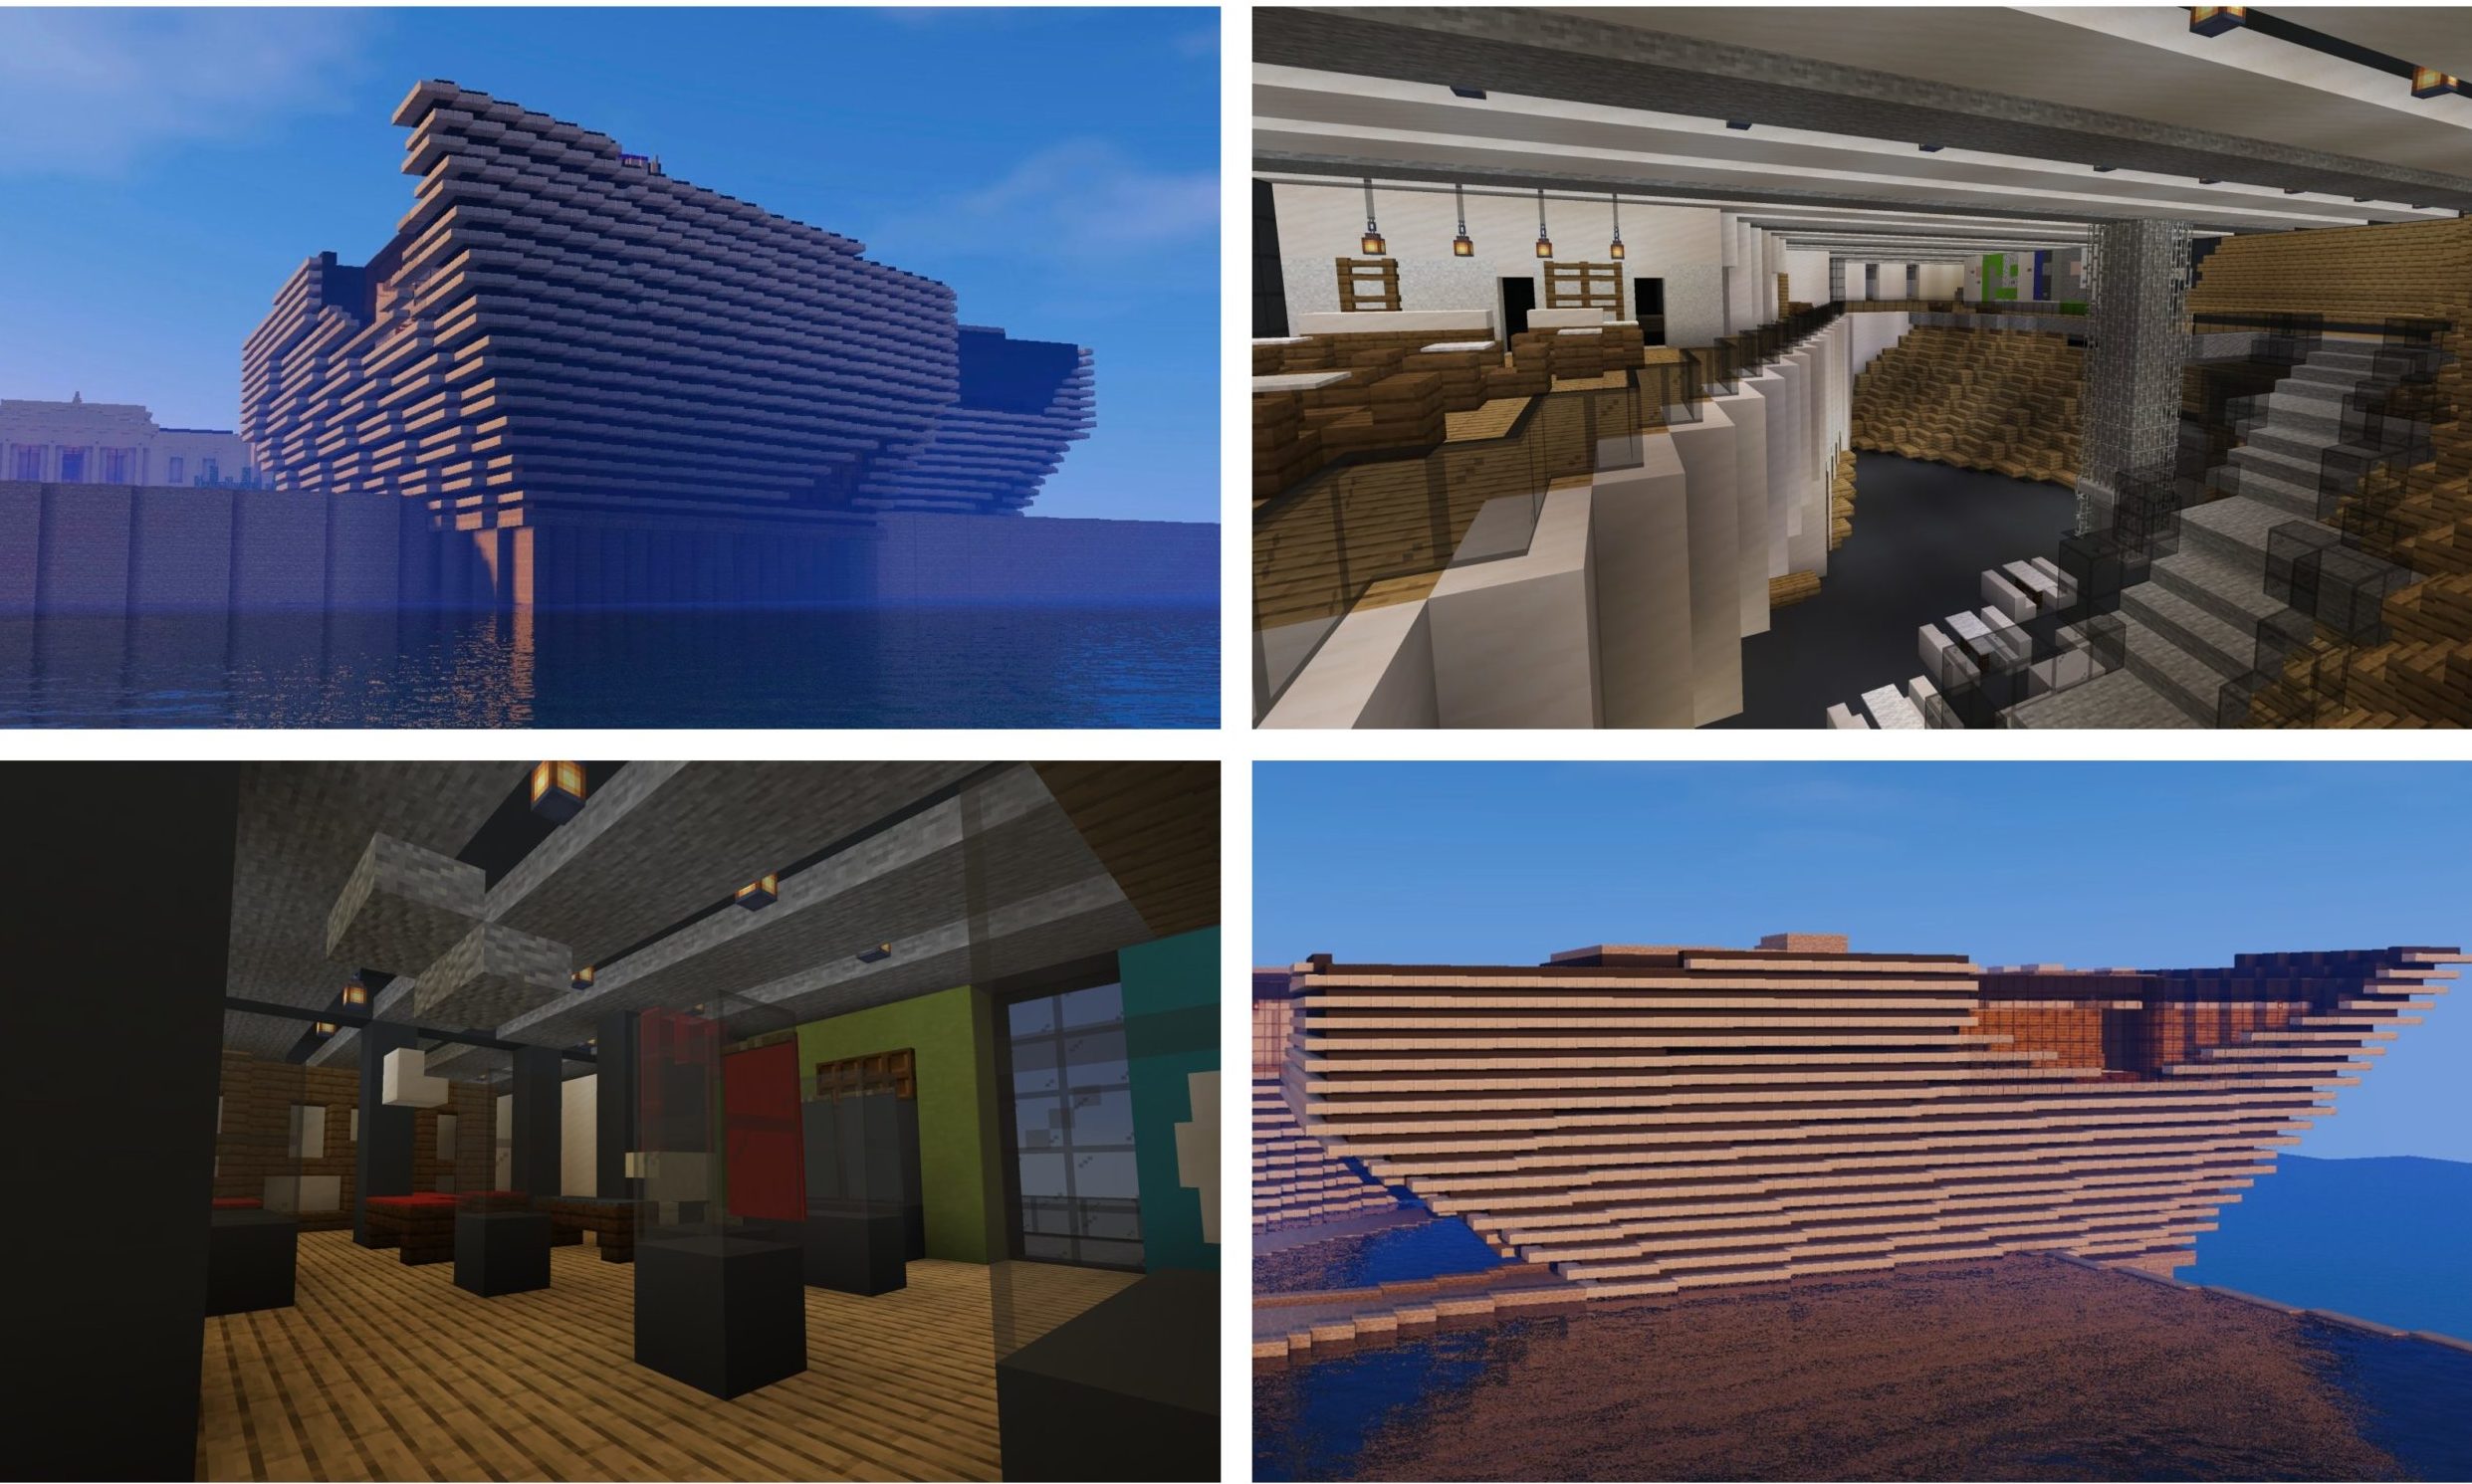 Csian Canave's Minecraft recreation of the V&A.